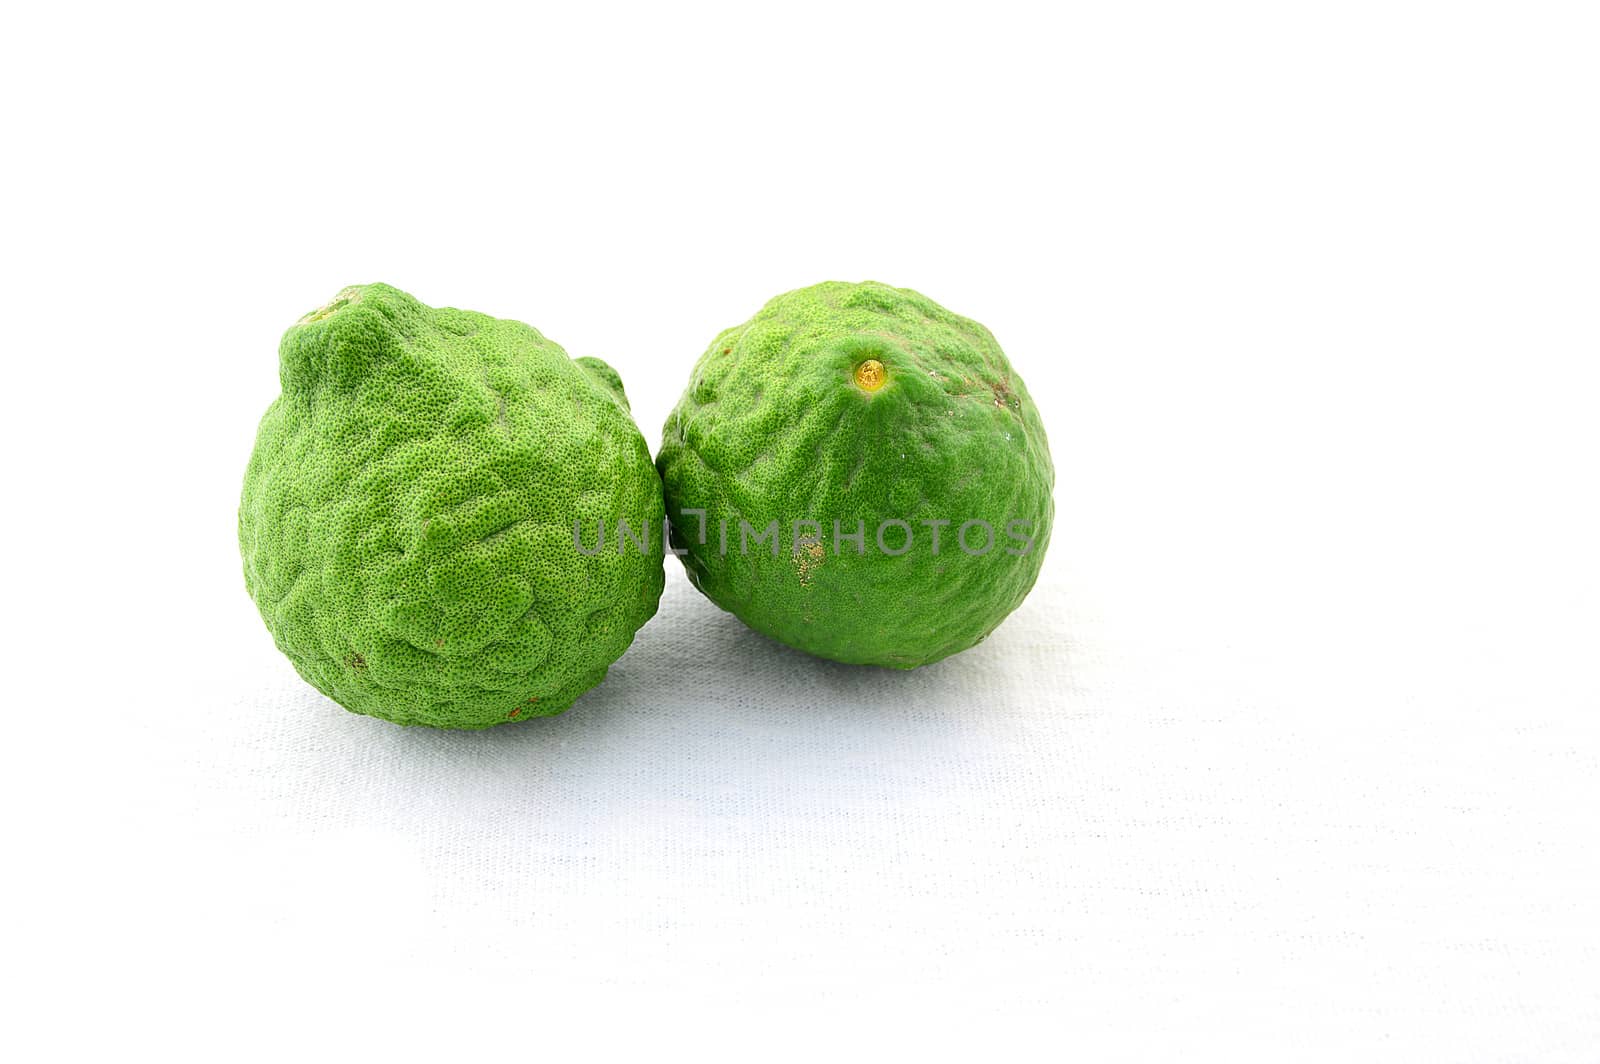 Kaffir Lime isolate on white by Lekchangply